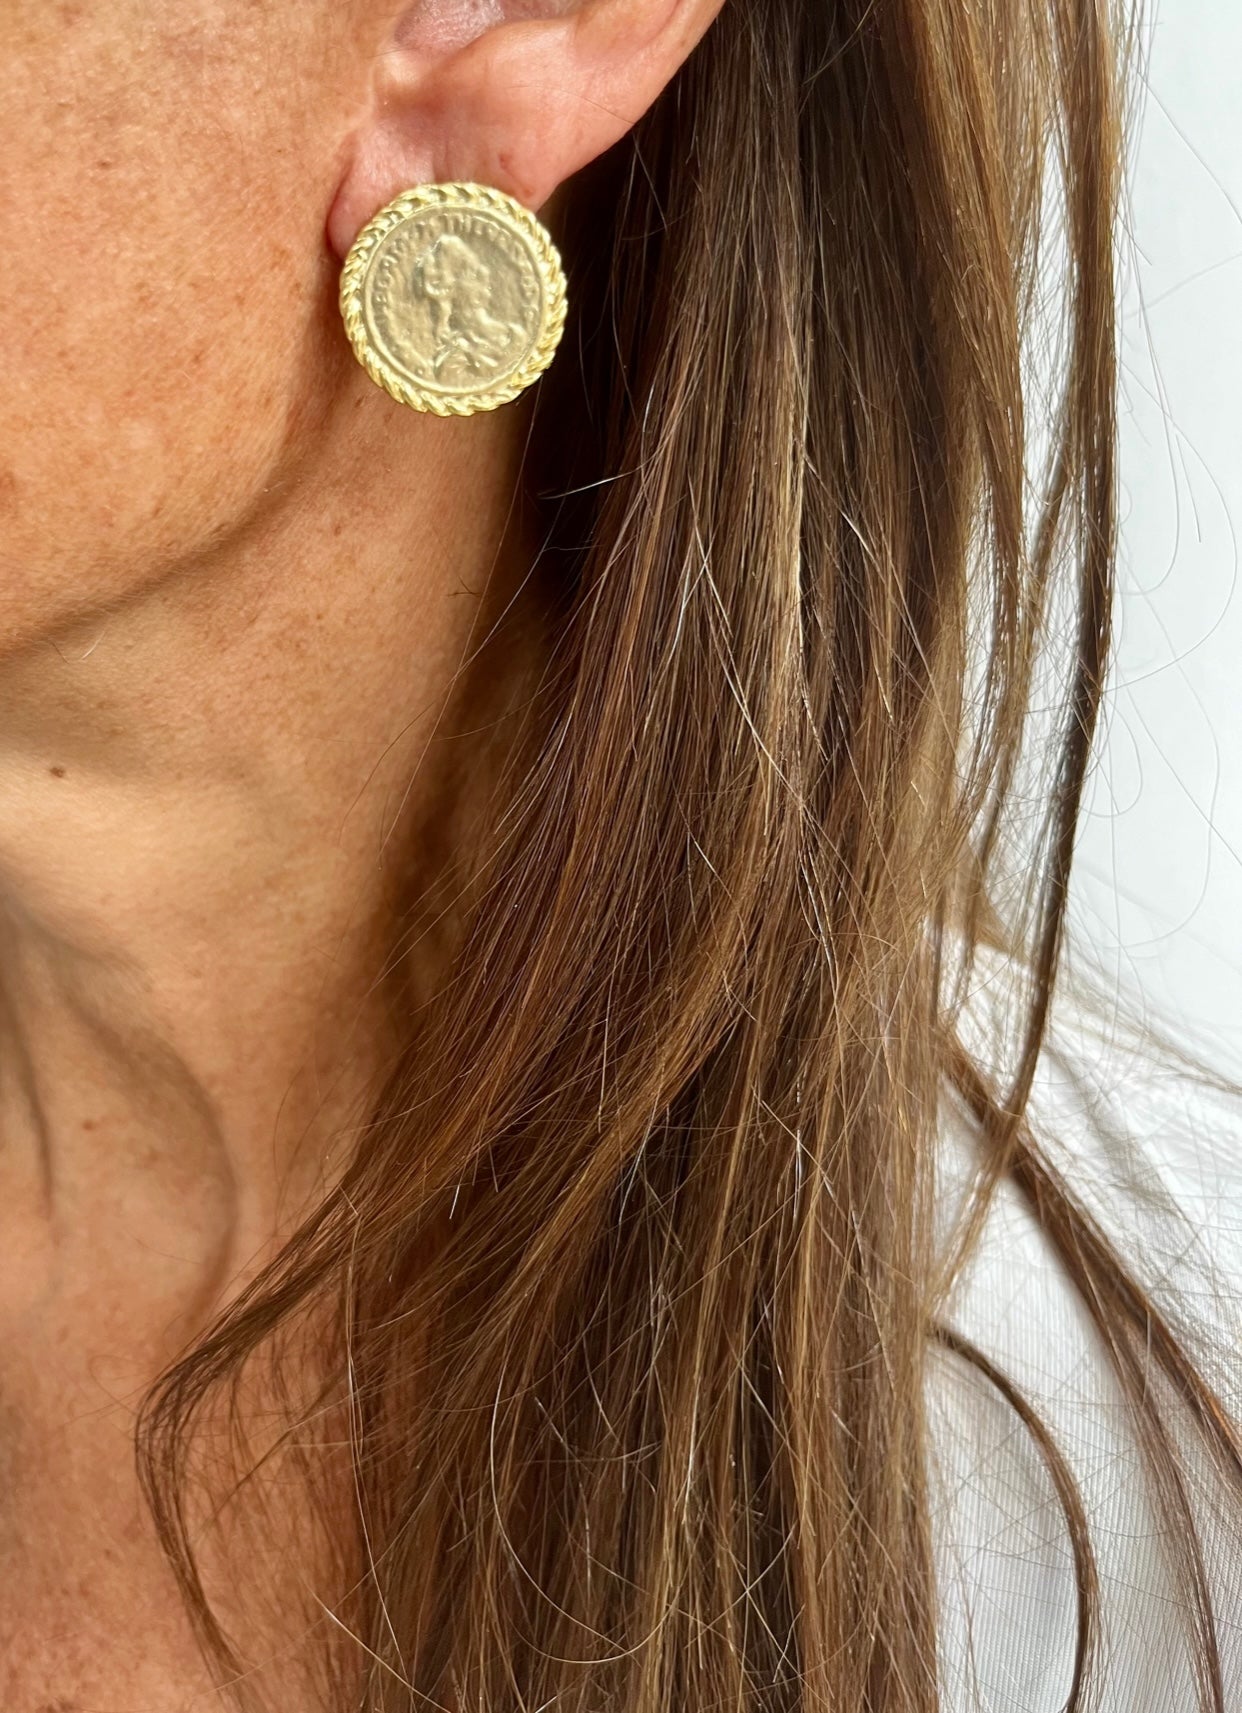 Old World coin stud earrings